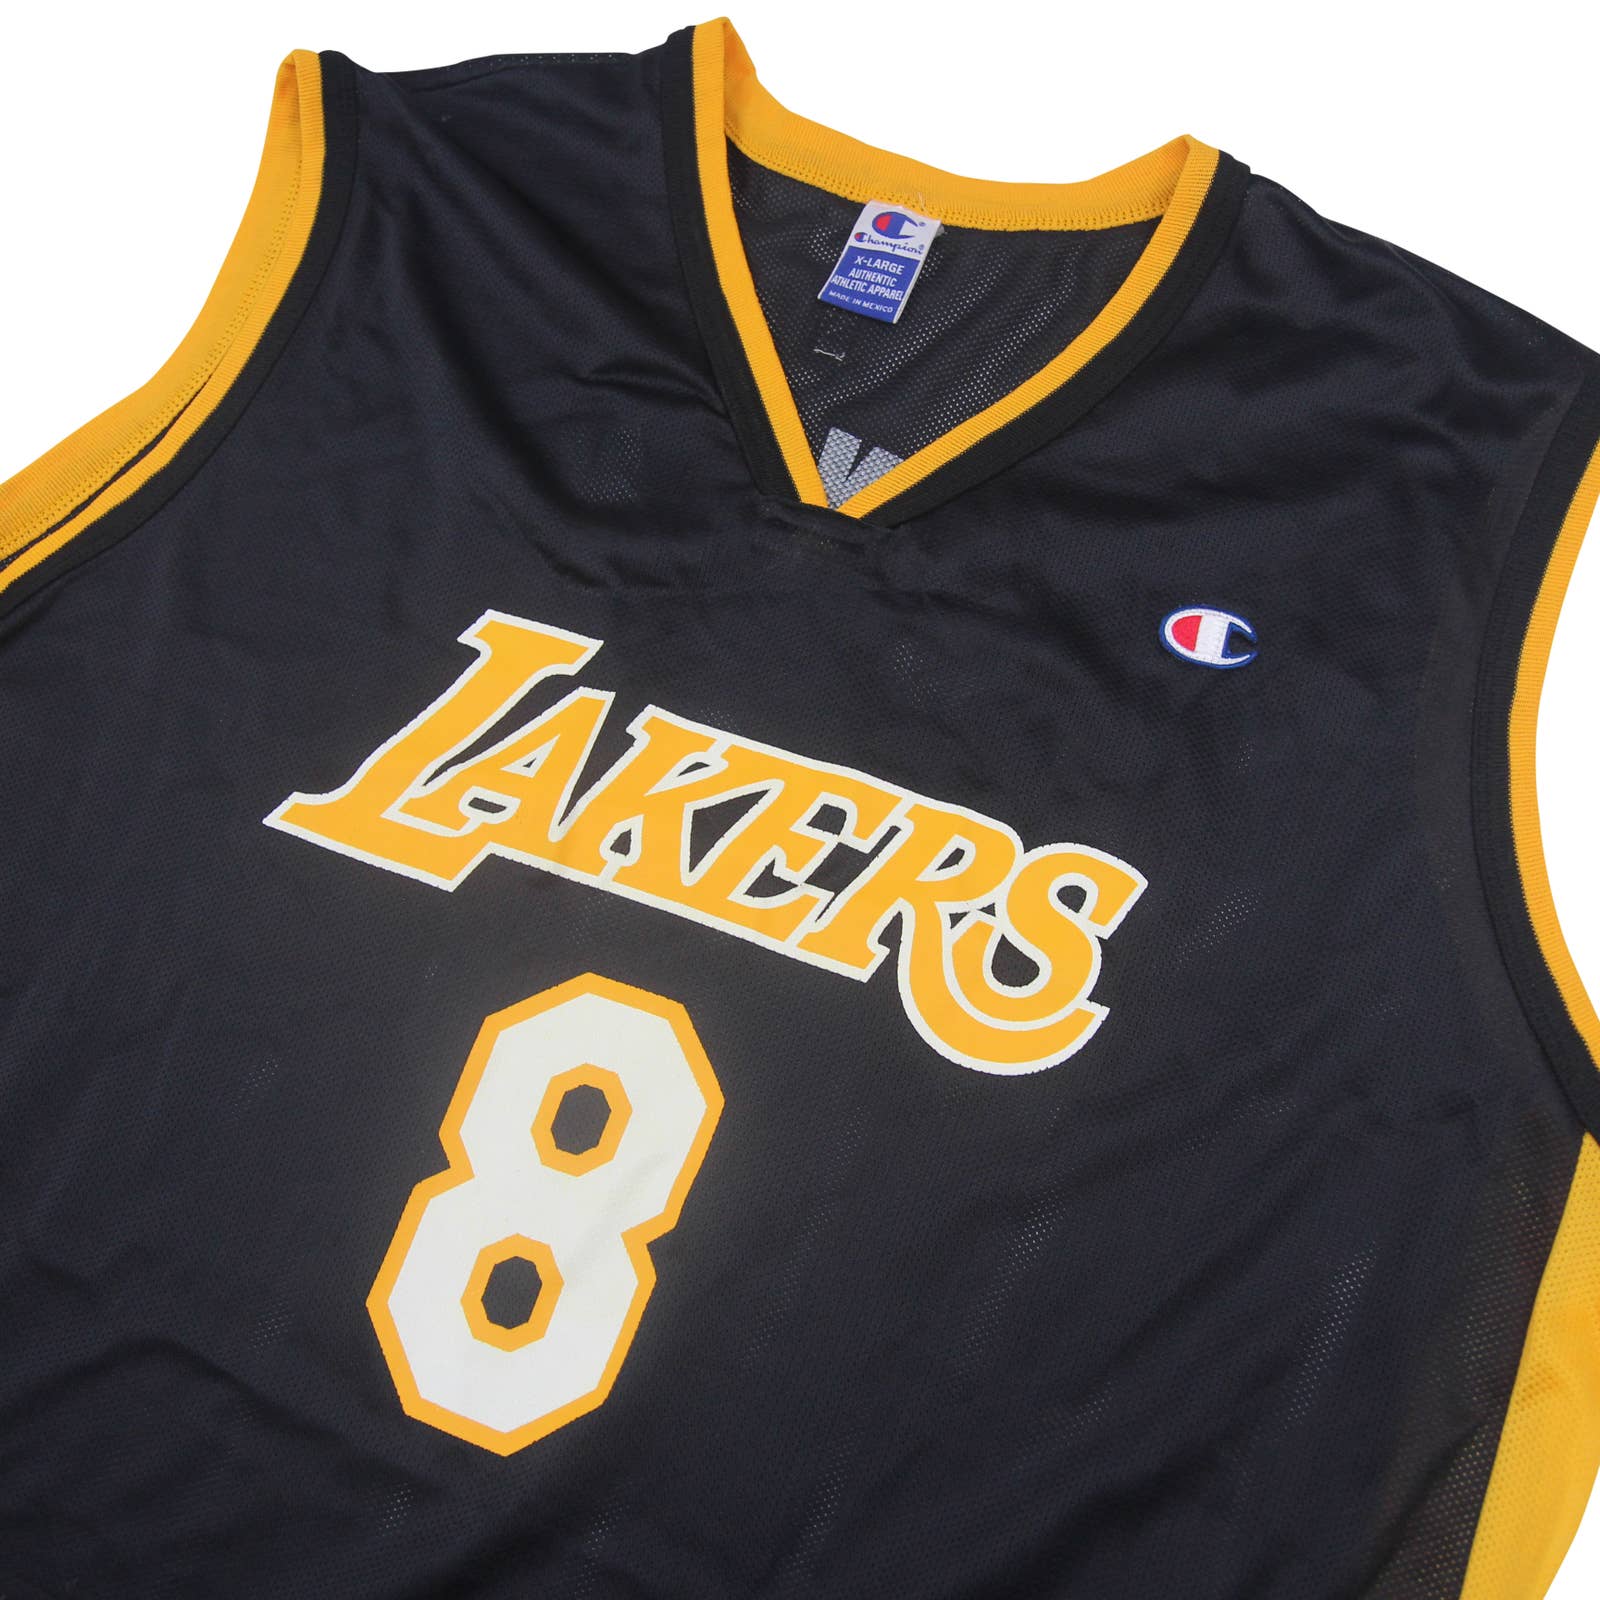 lakers jersey xl